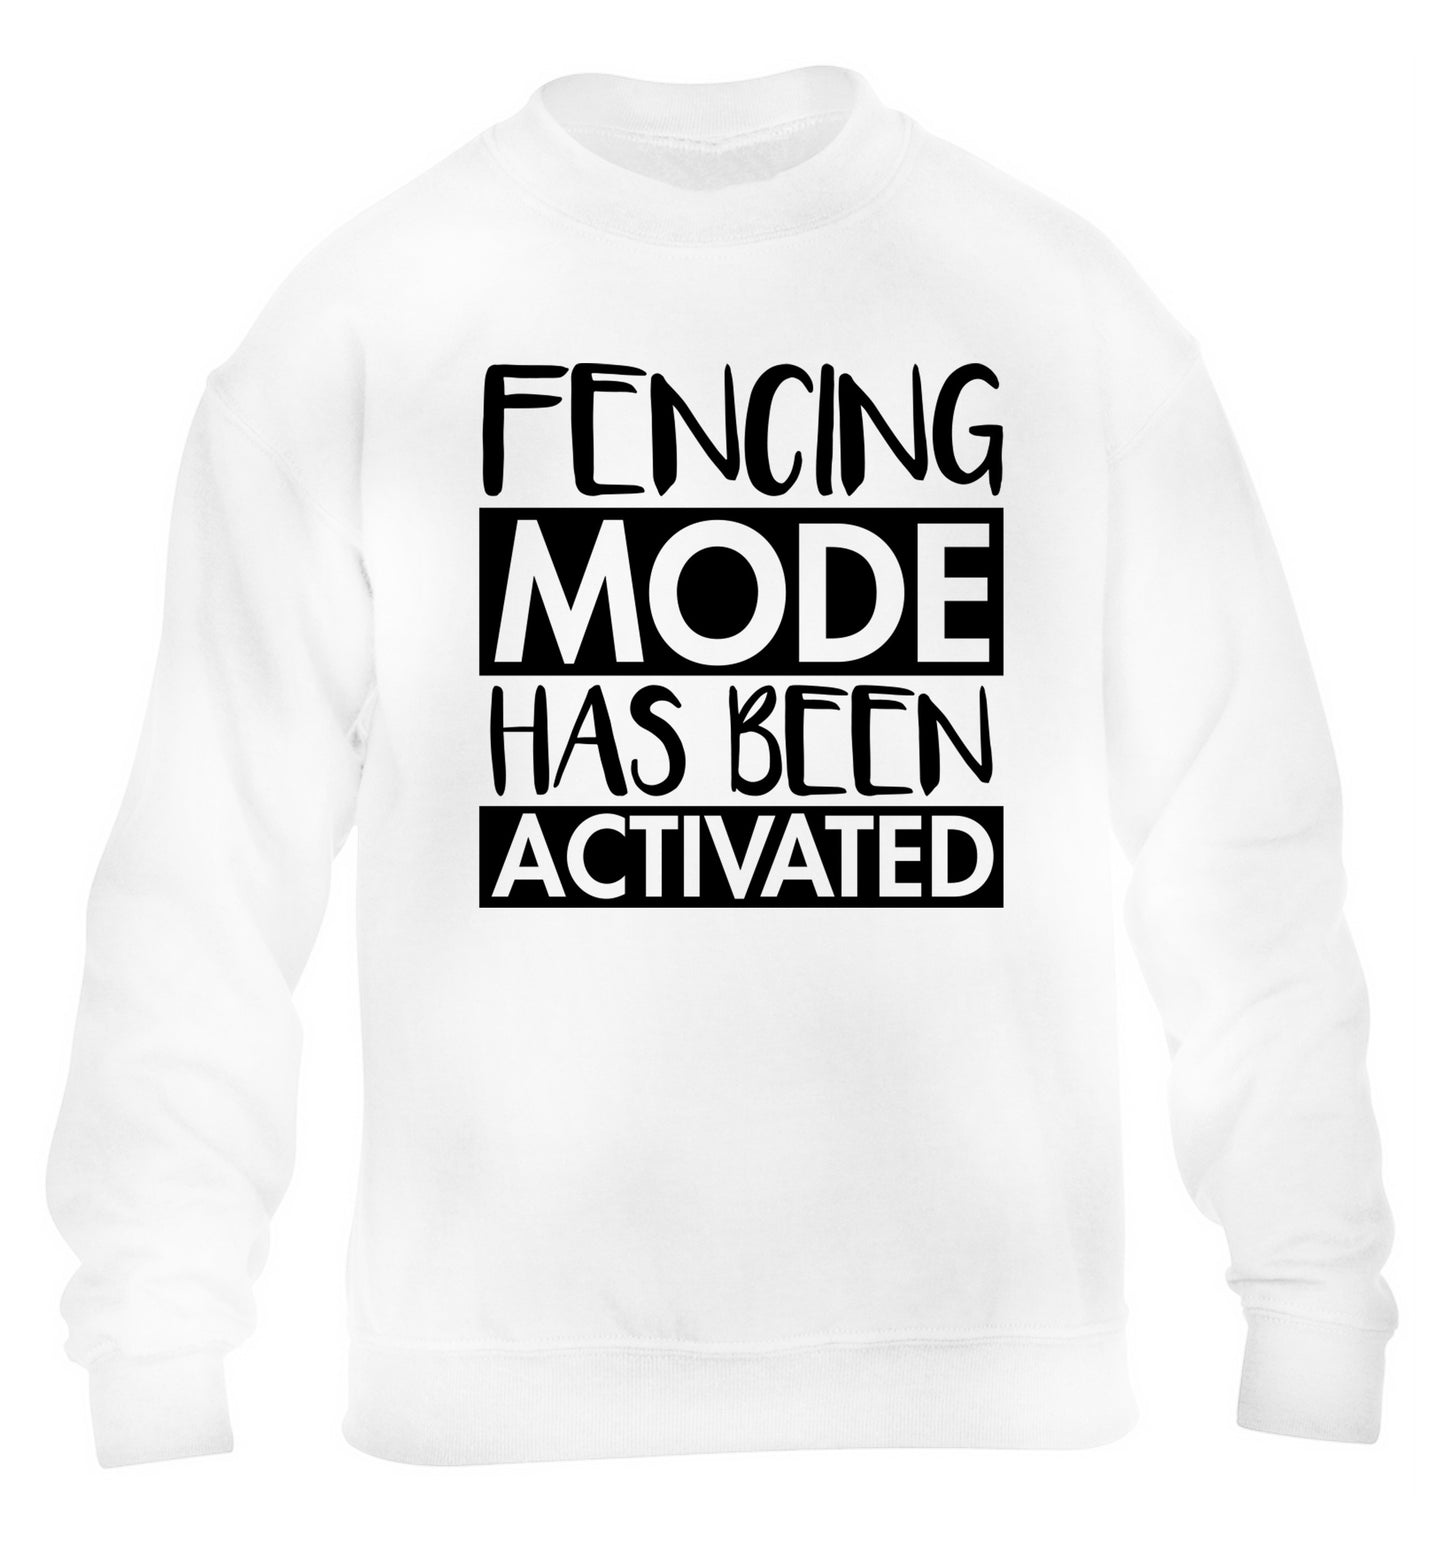 Fencing mode activated children's white sweater 12-14 Years